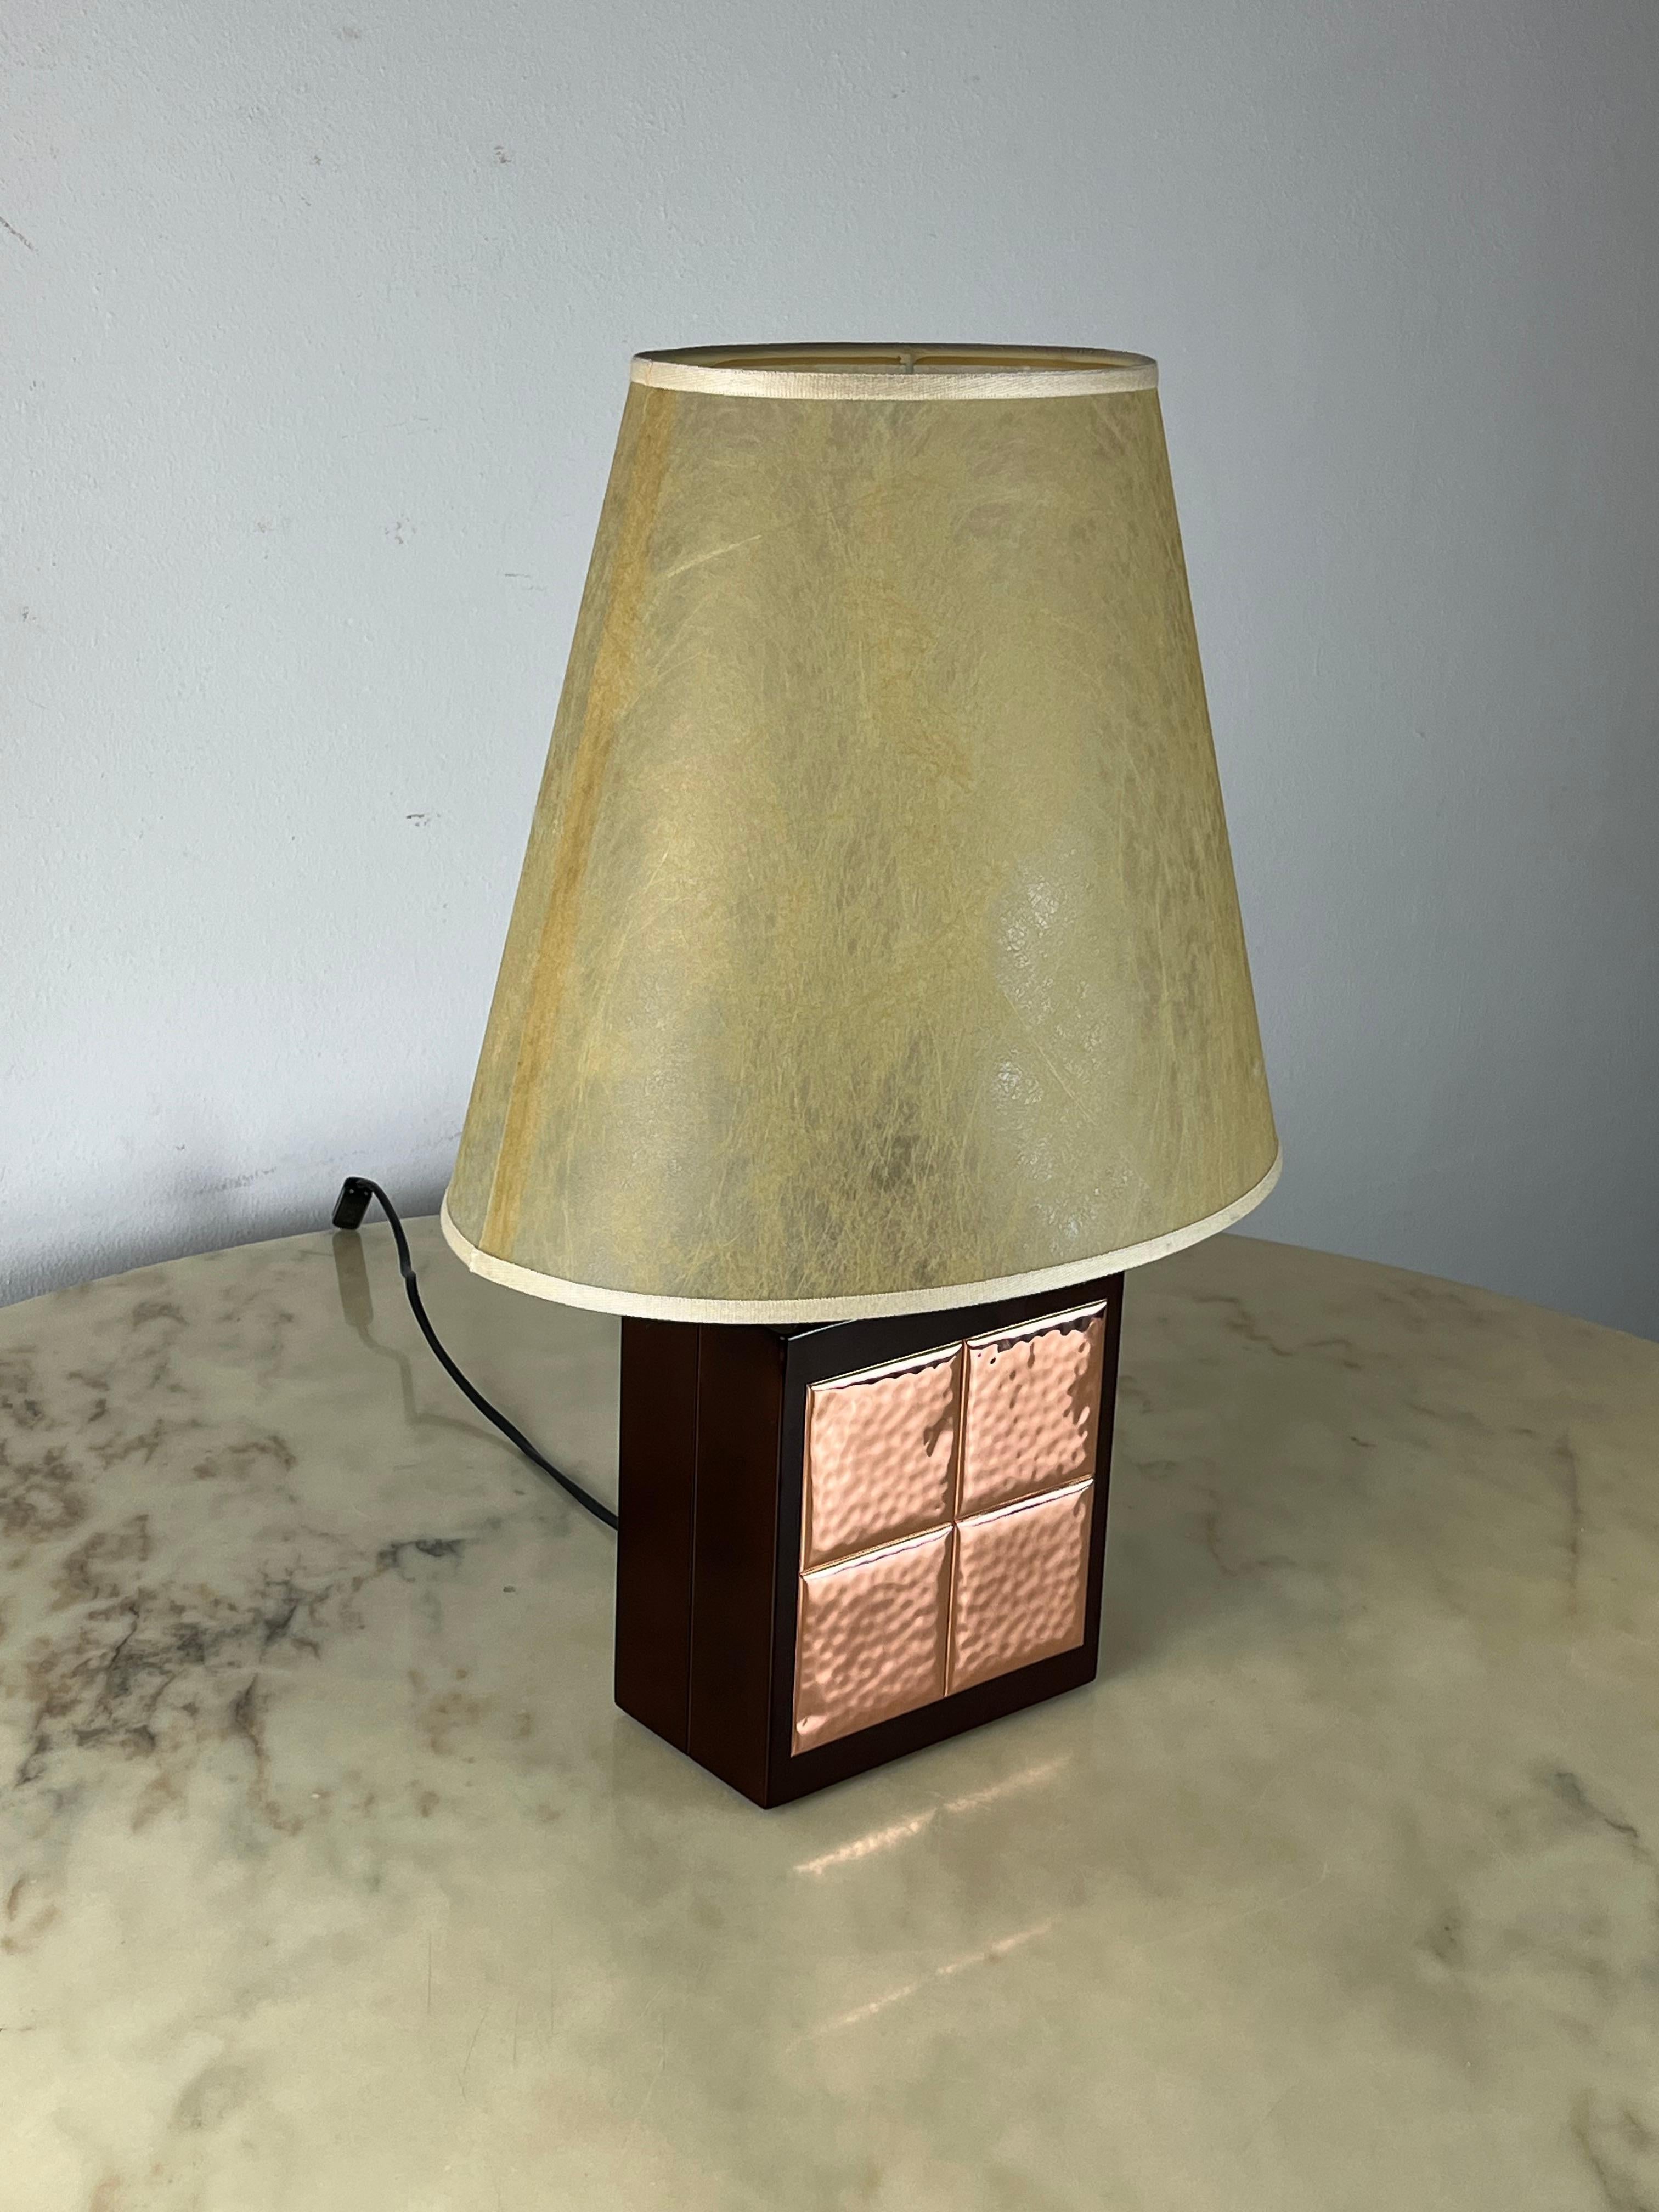 Italian Table Lamp in Walnut and Copper, 1990s For Sale 6